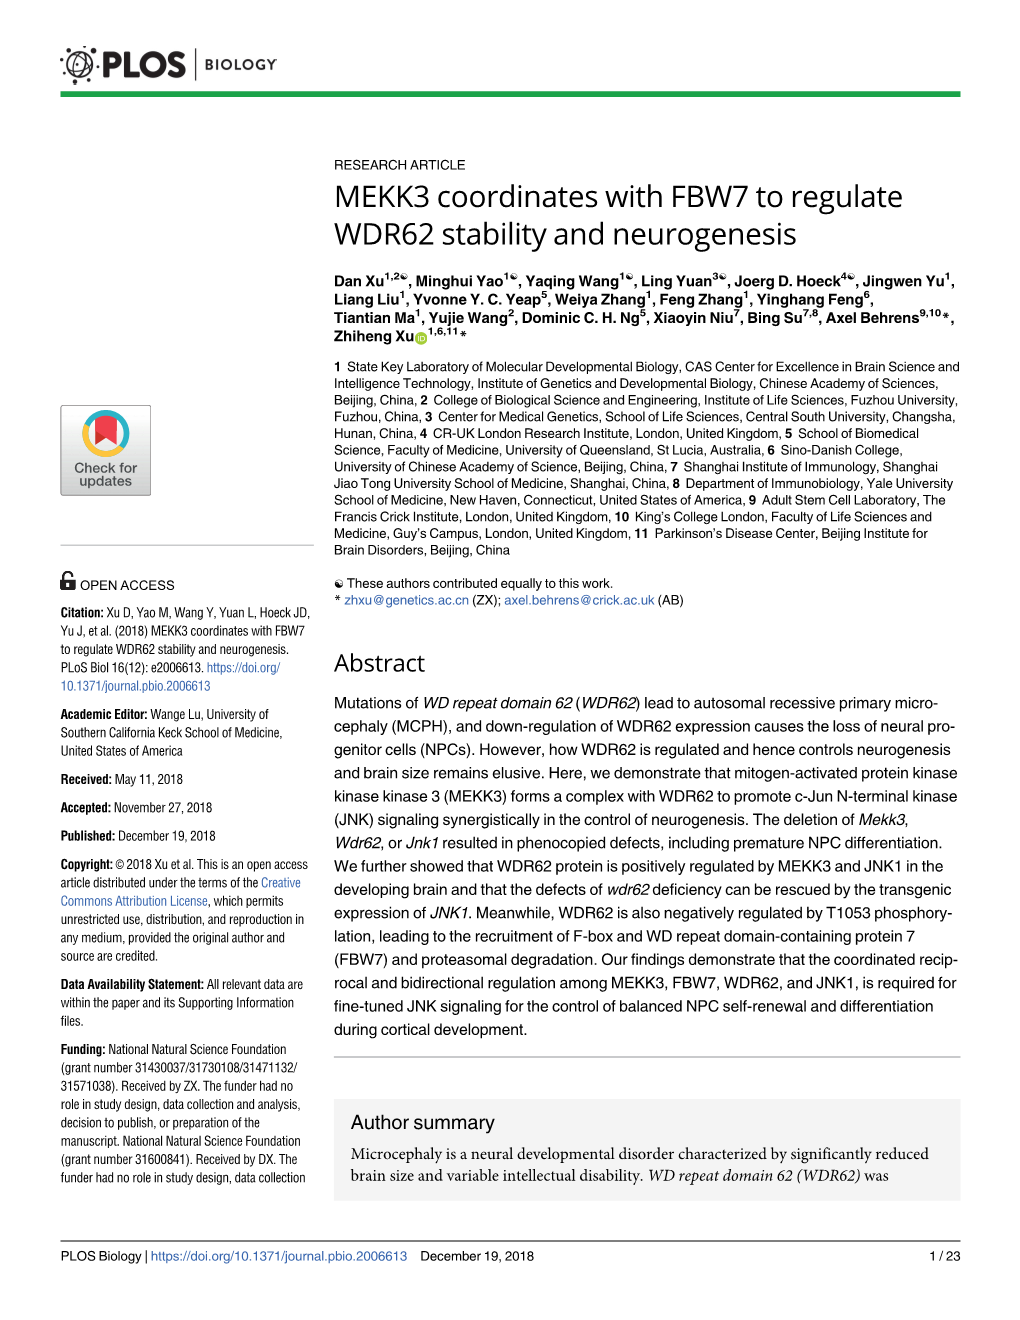 MEKK3 Coordinates with FBW7 to Regulate WDR62 Stability and Neurogenesis